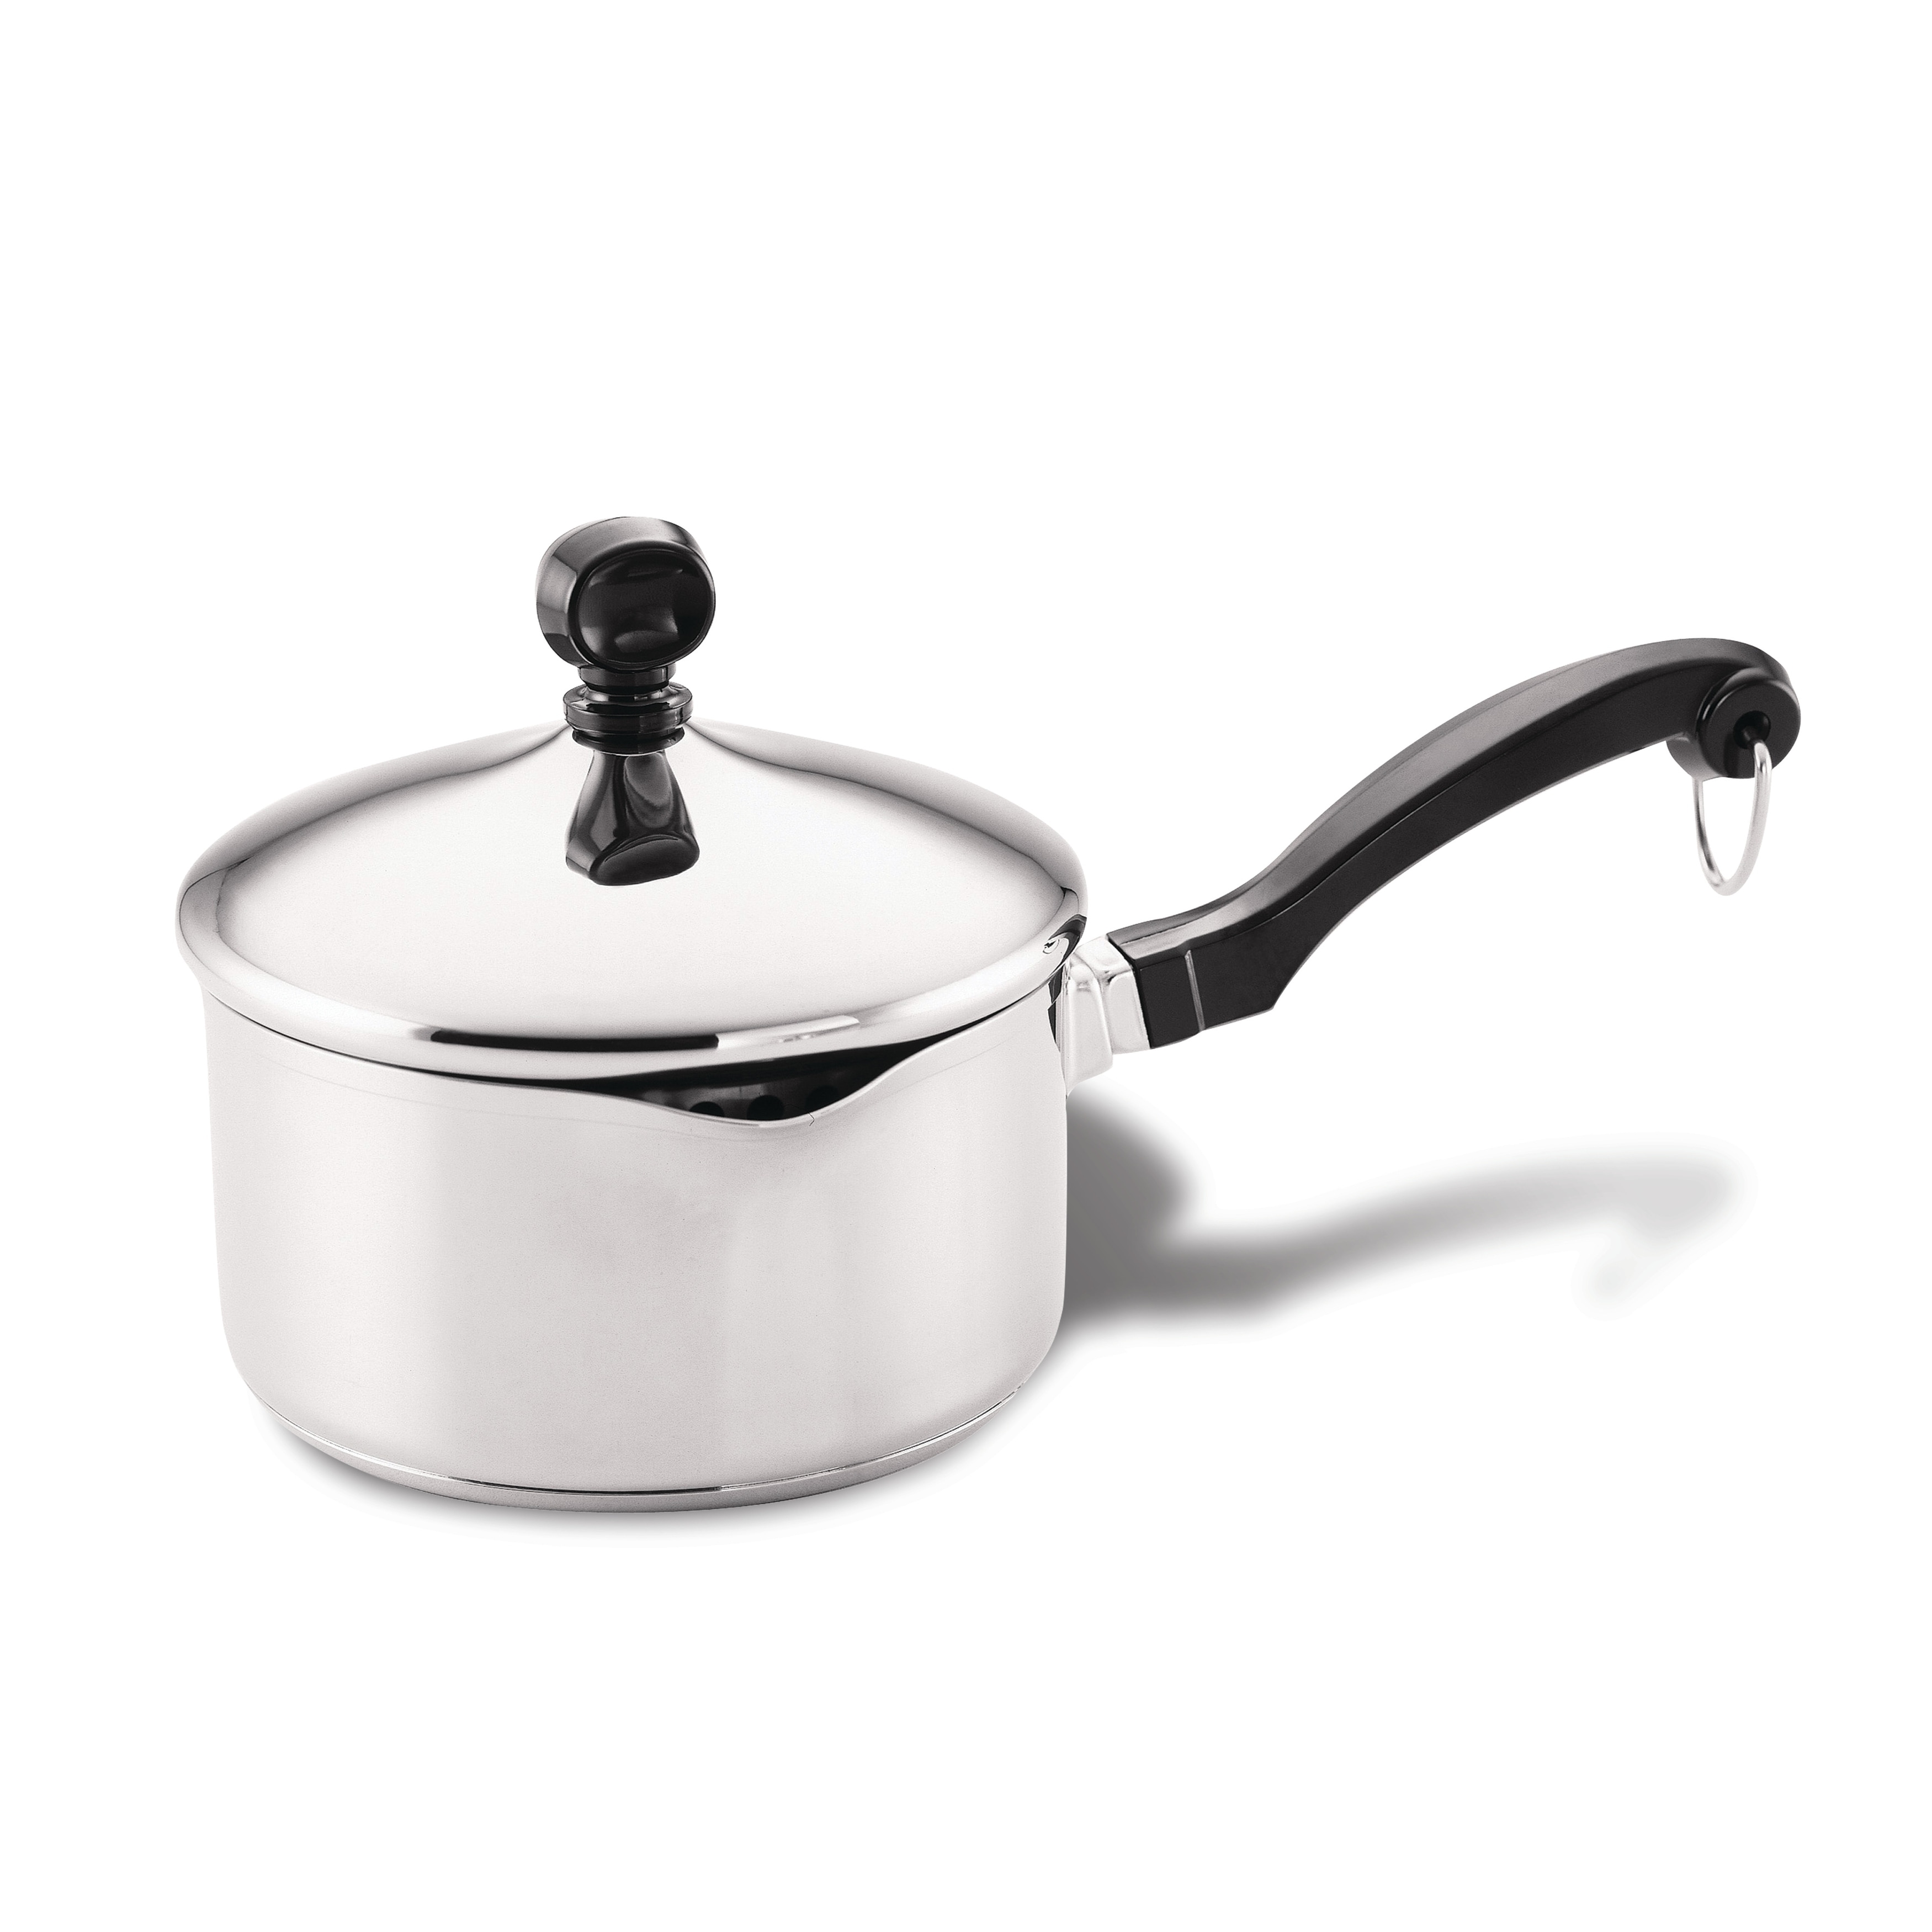 https://ak1.ostkcdn.com/images/products/is/images/direct/9a61f29113e6e05a070603b7665196ffe1db789d/Farberware-Classic-Stainless-Steel-1-quart-Covered-Straining-Saucepan.jpg